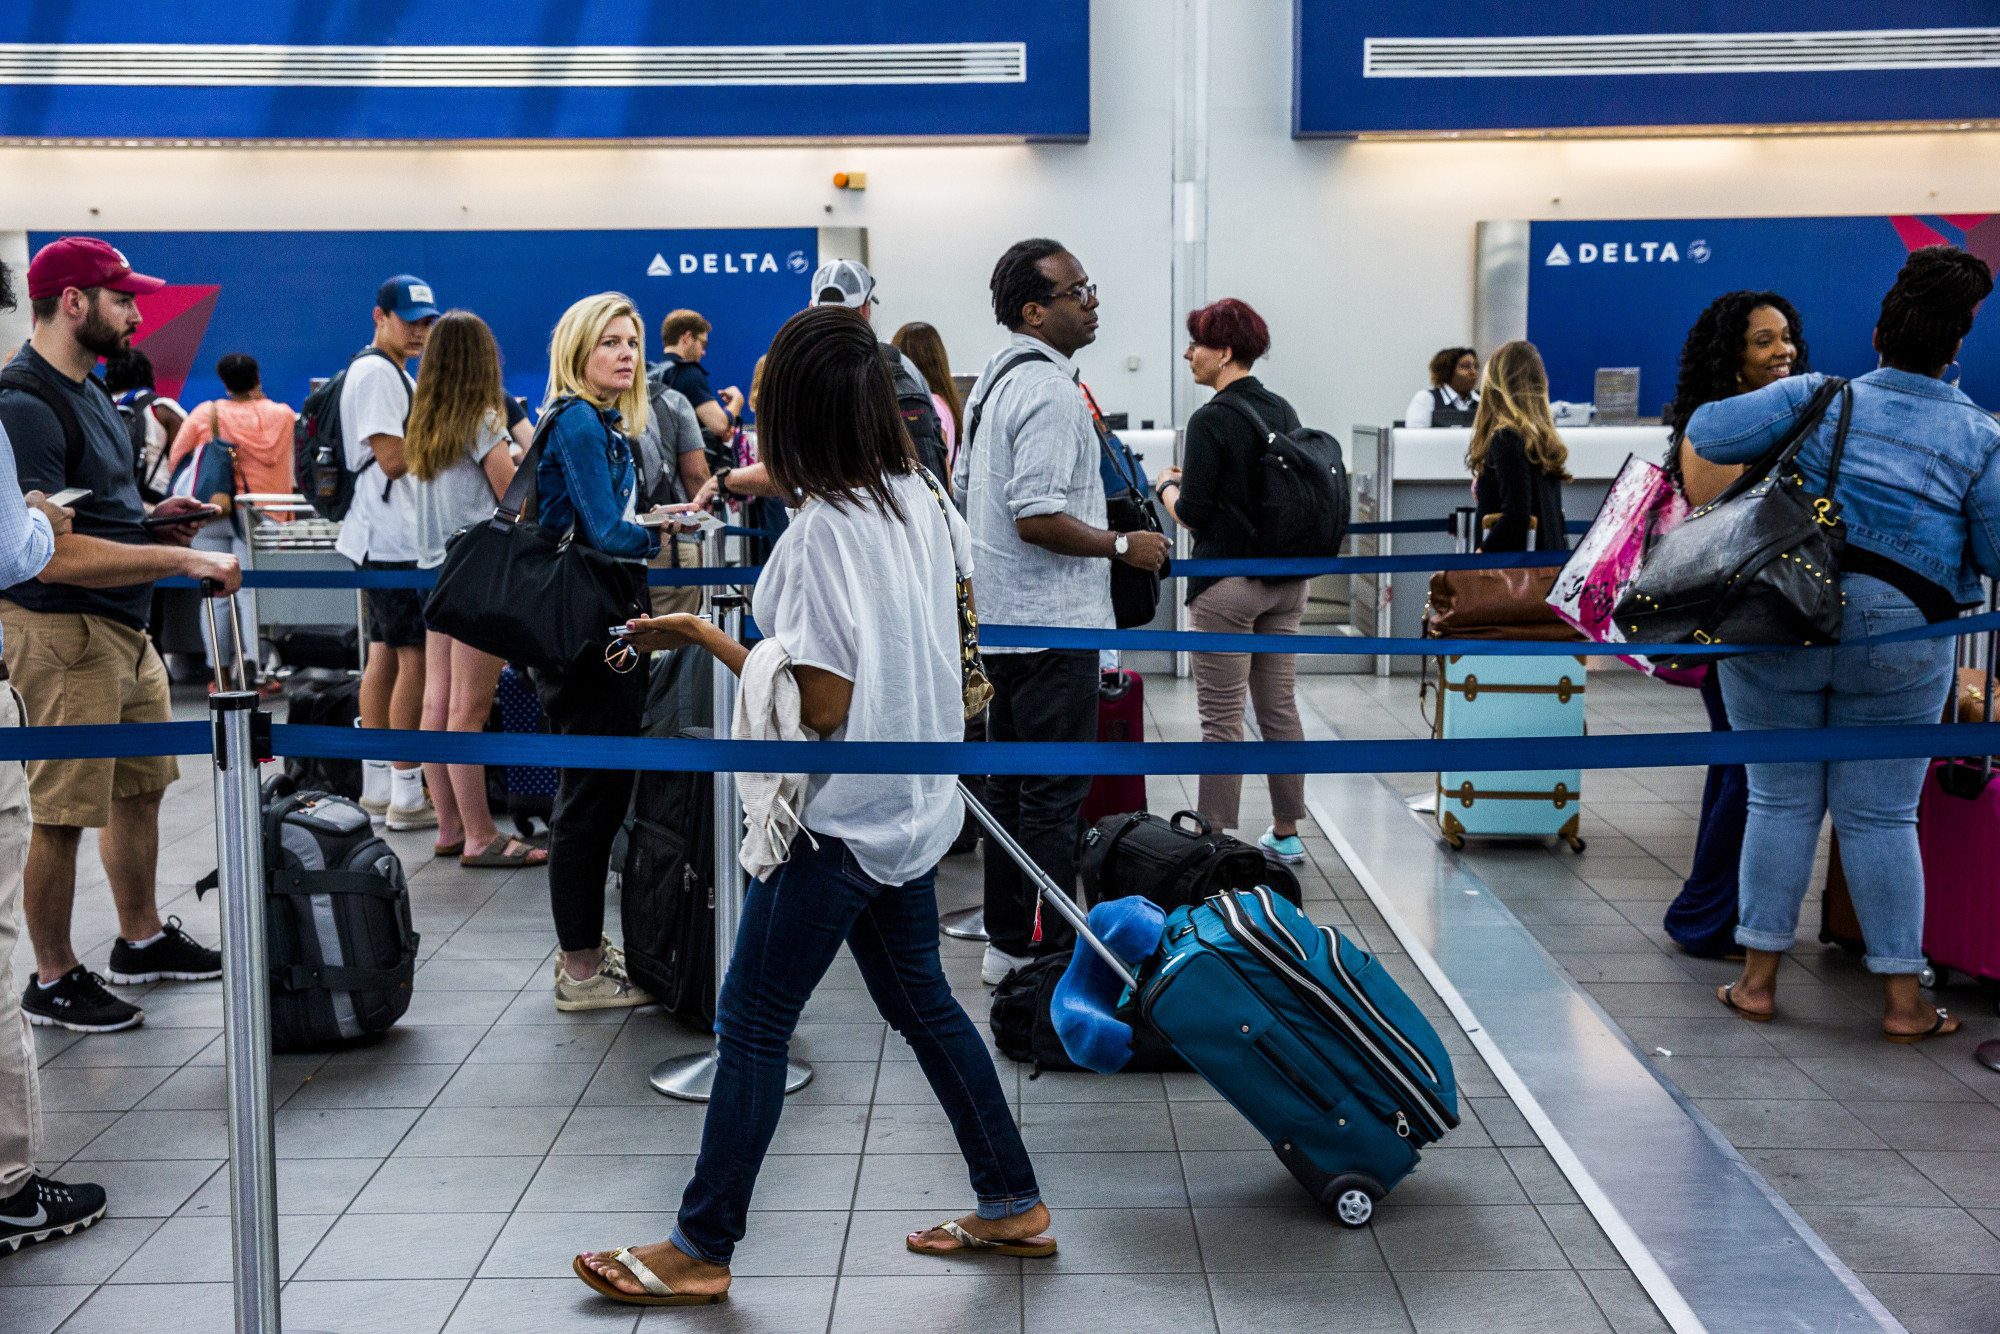 Pictured are travelers and their luggage at an airport. American Airlines just launched enhanced baggage tracking.